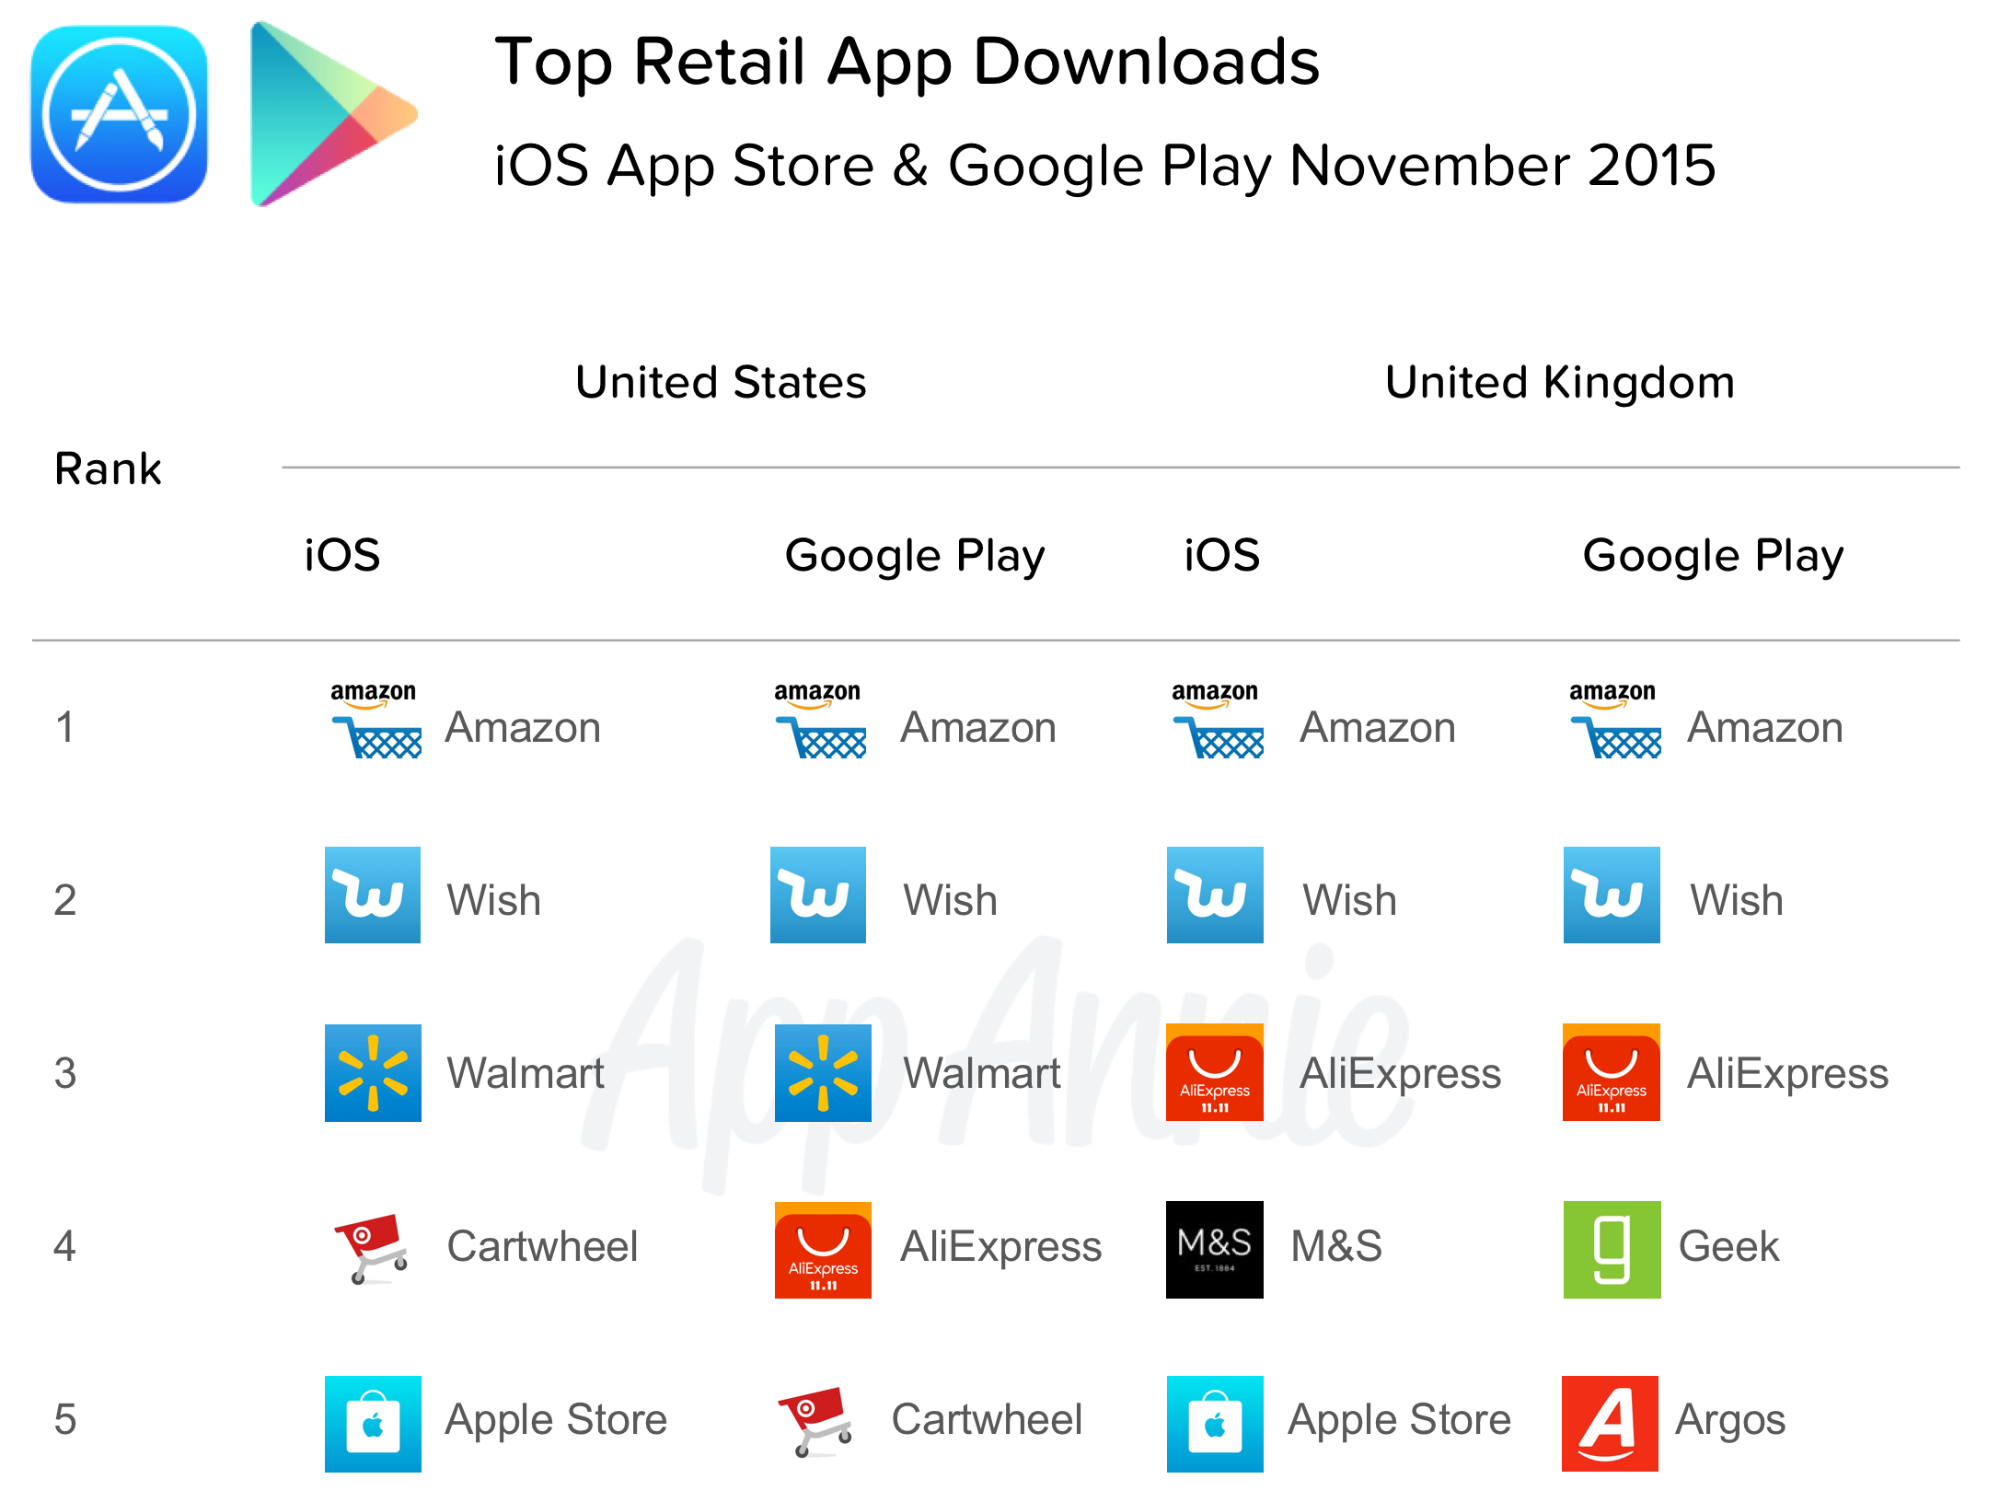 November 2015 Top 5 Retail Downloads iOS and Google Play